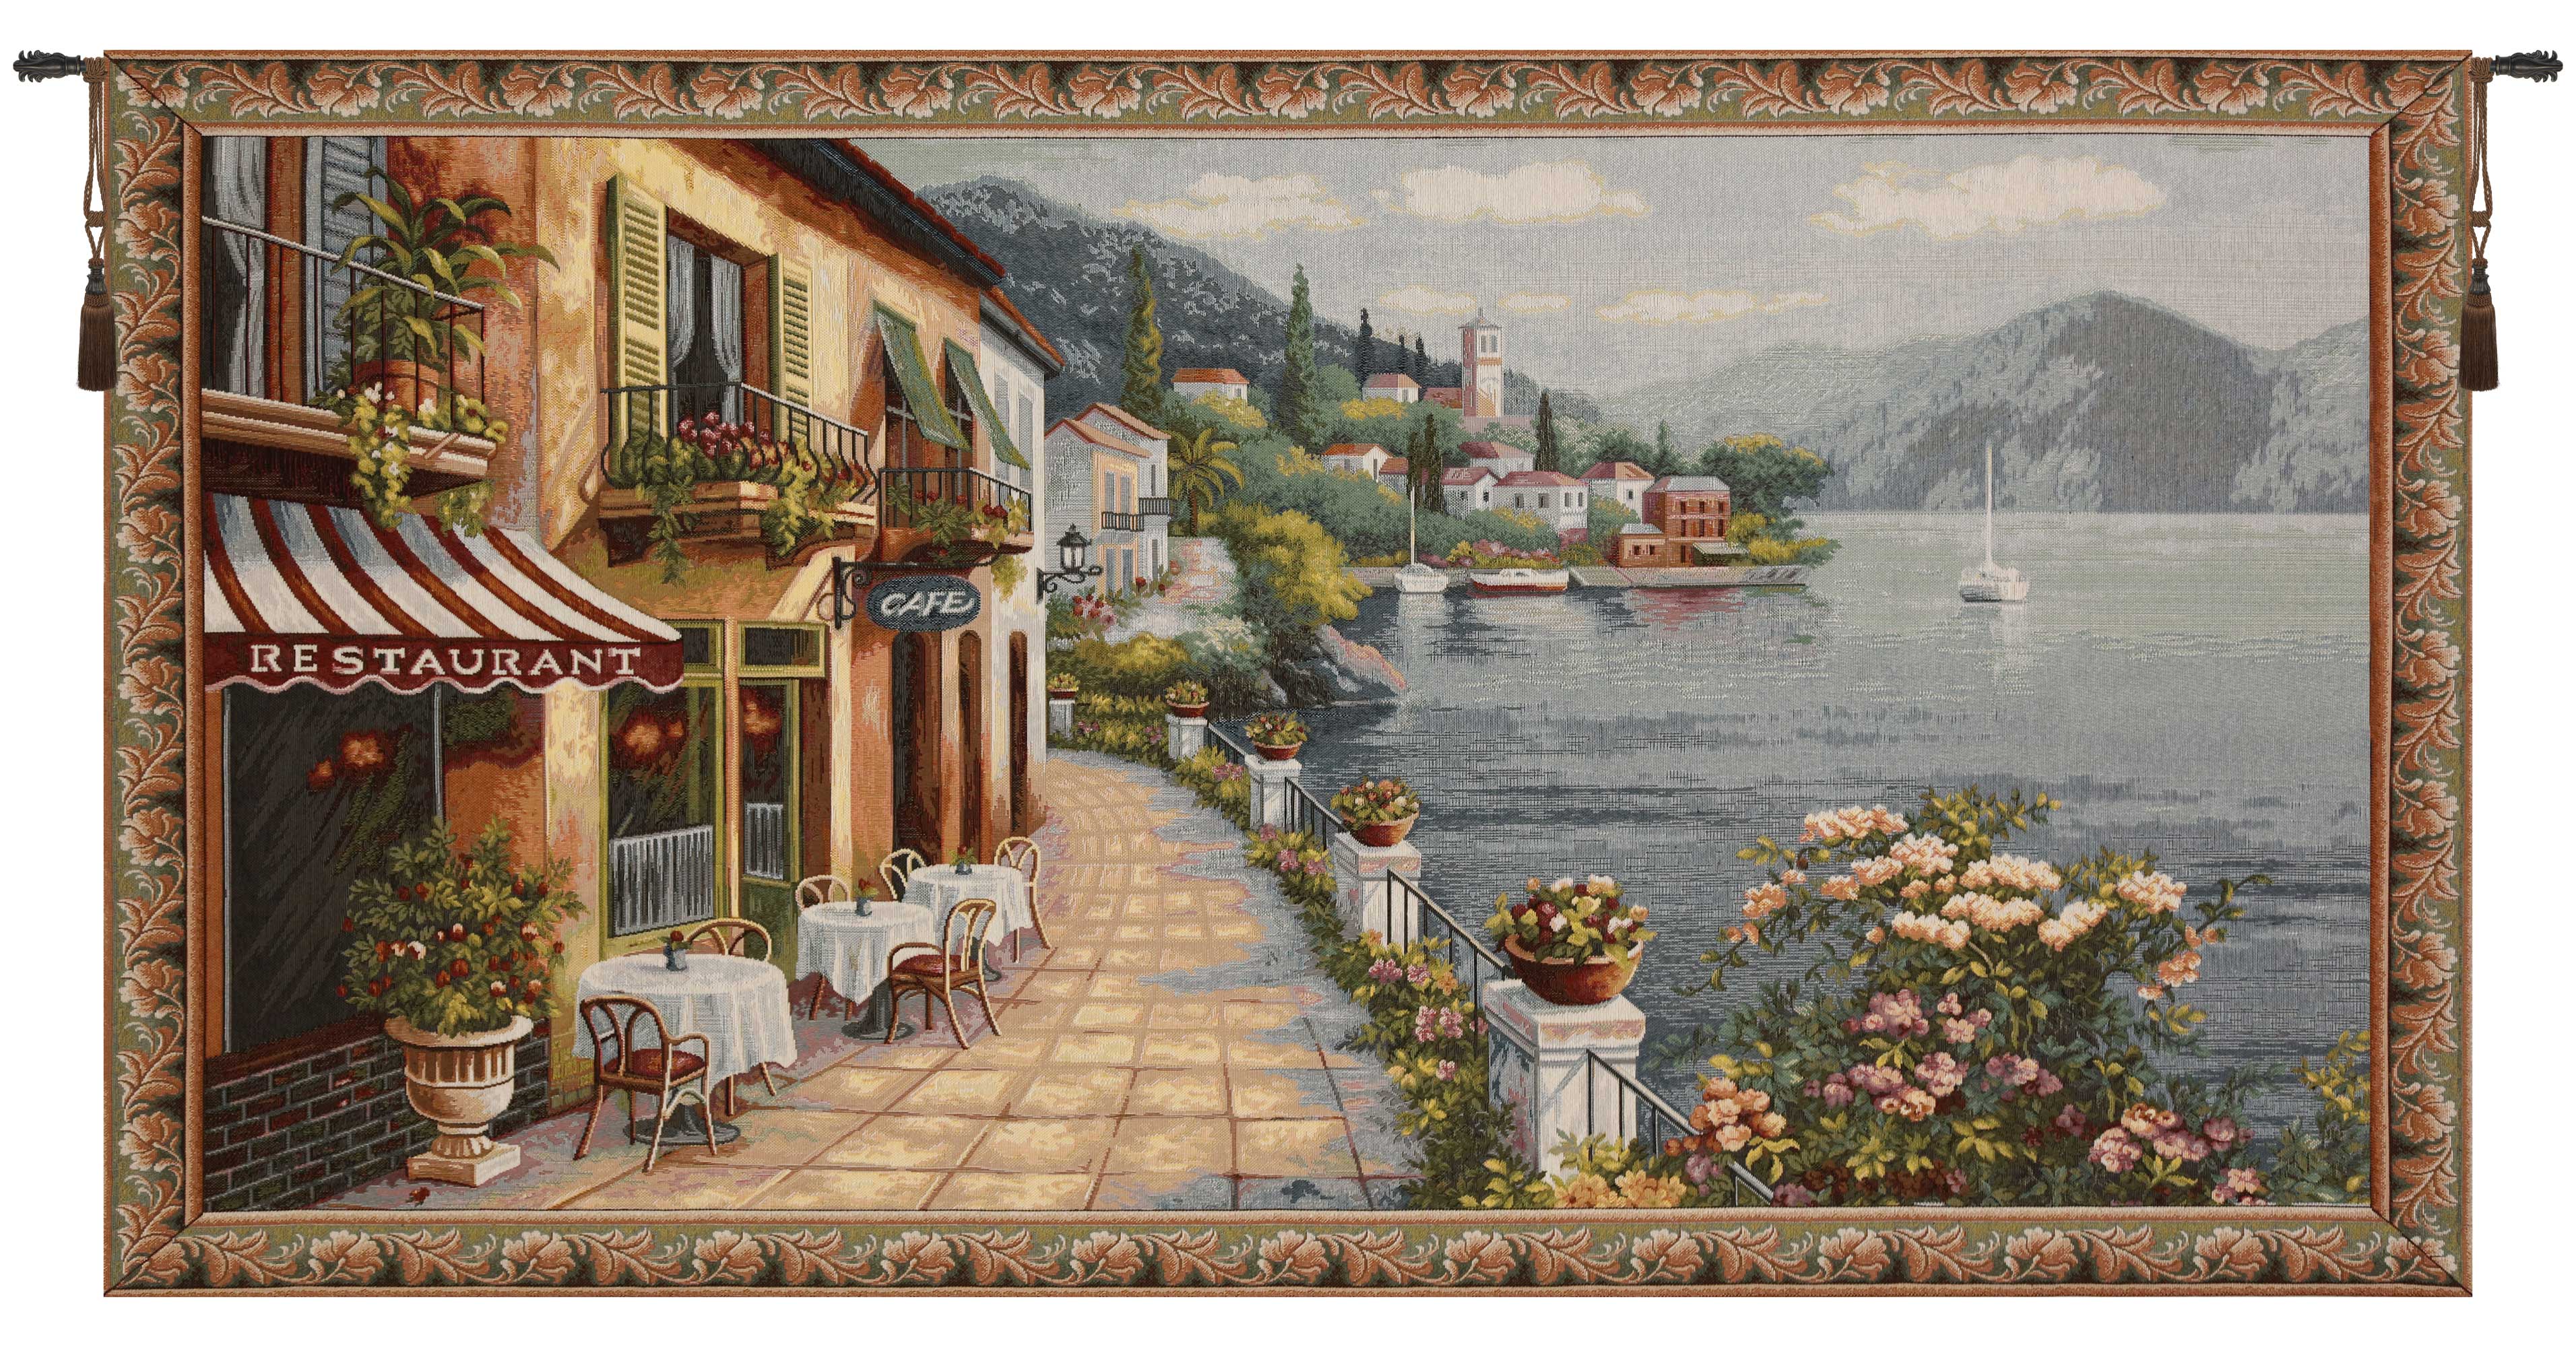 Jacquard Woven Decorative Tapestry 27x57 in Café by Lake Como - Wall Hanging